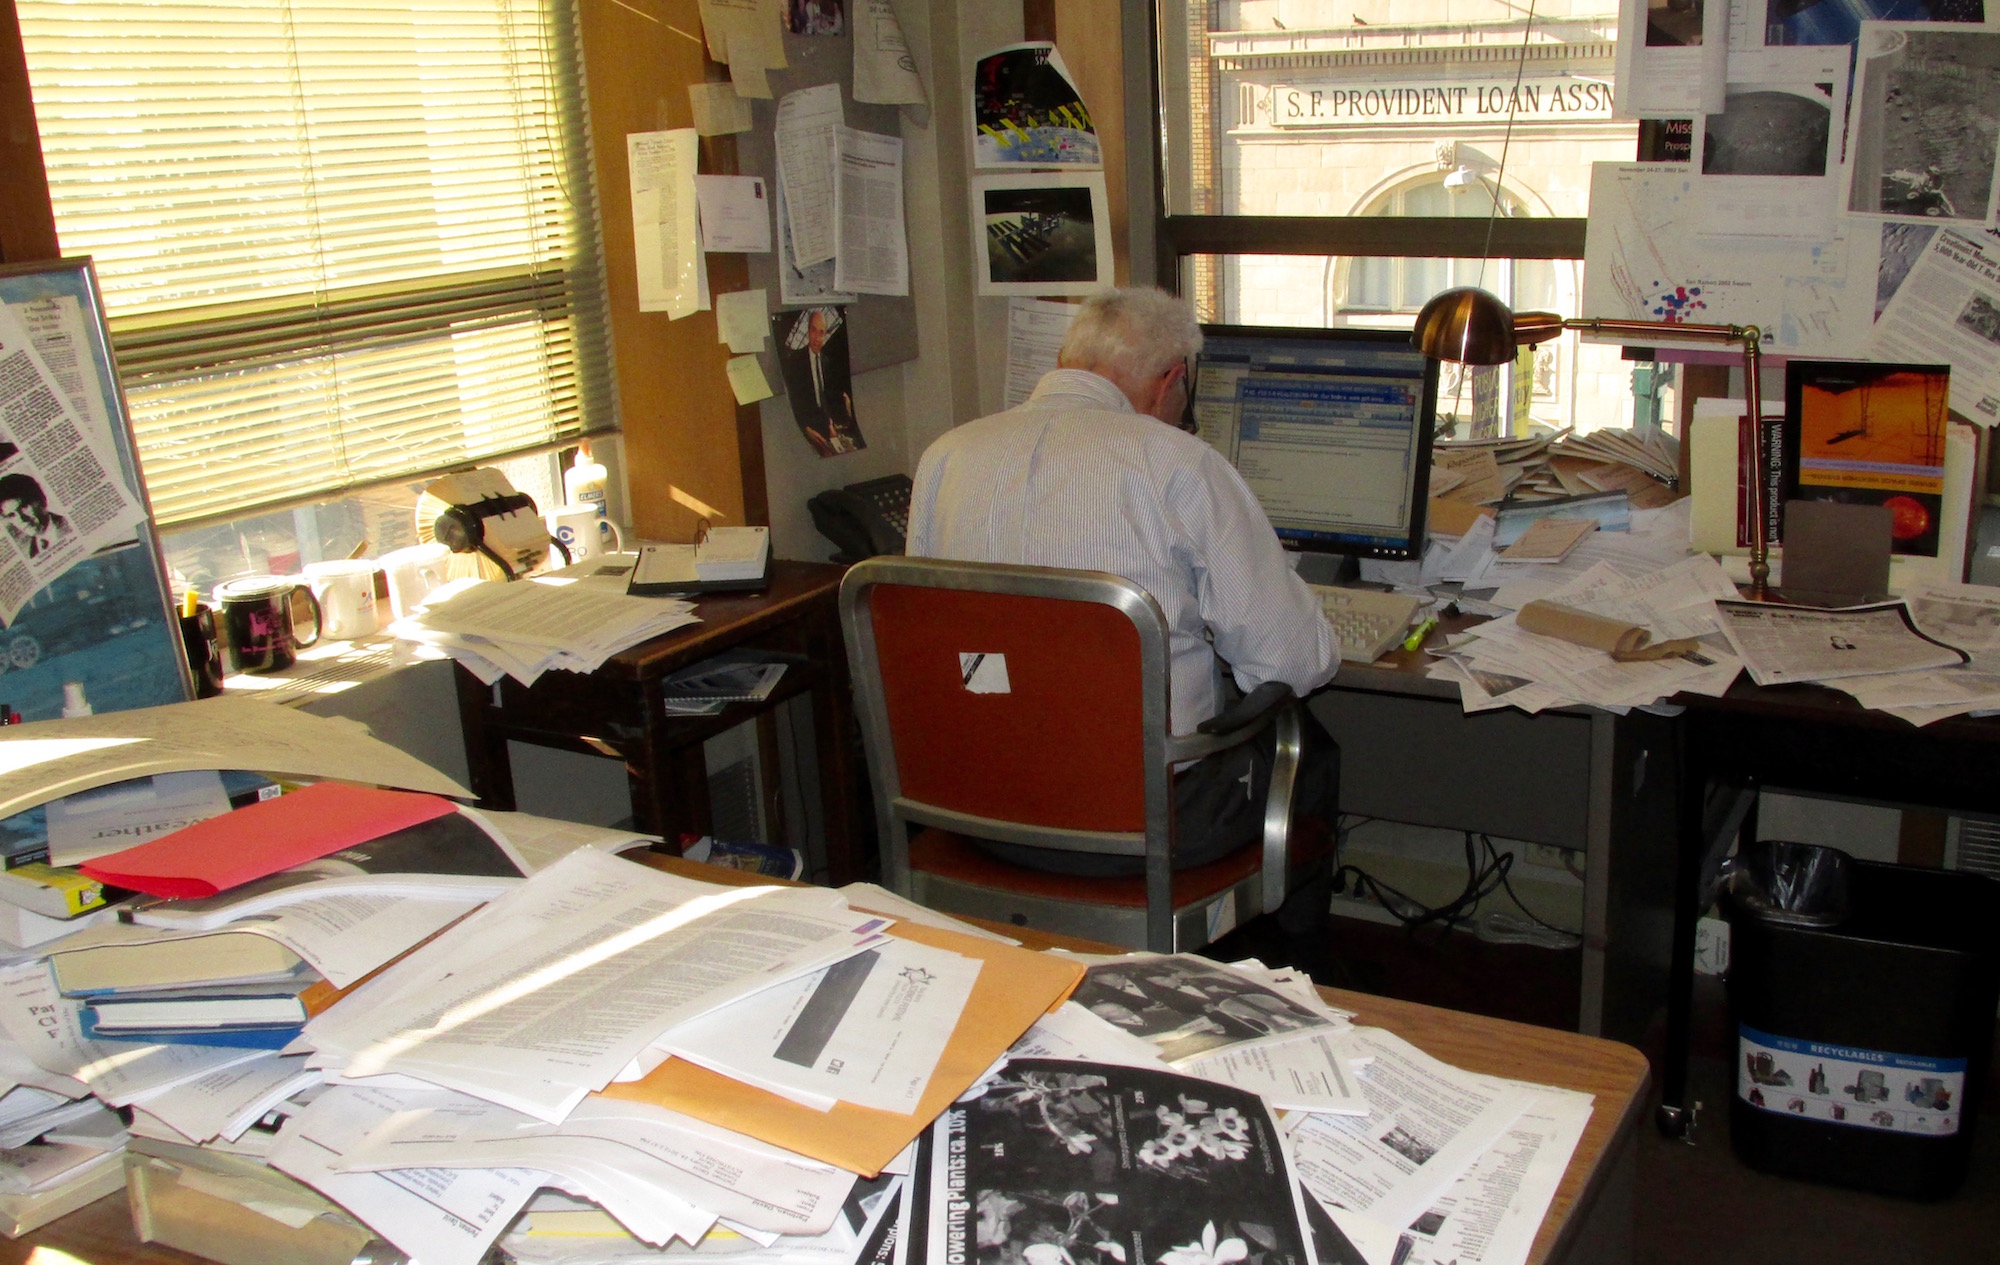 There was no mistaking Perlman's work space, piled high with research.